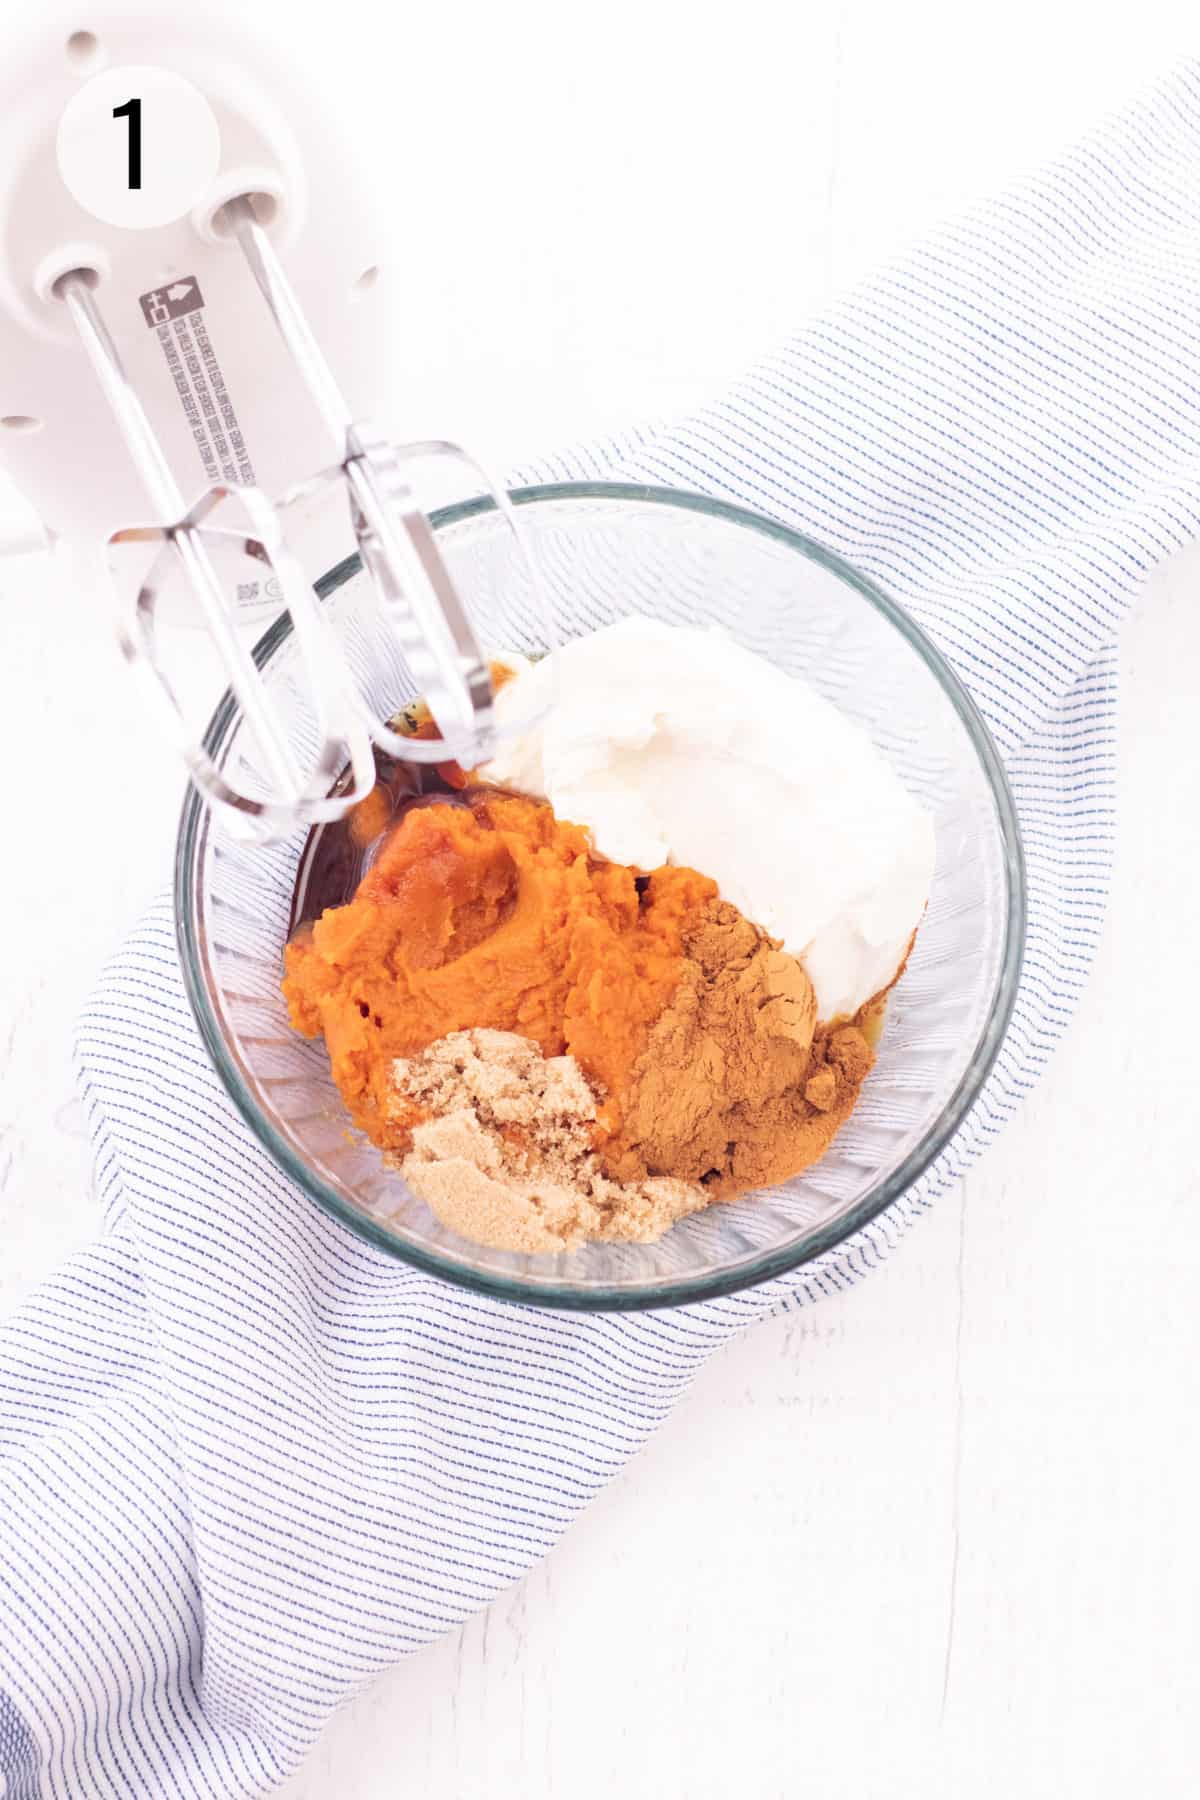 Pureed pumpkin, cream cheese, brown sugar, maple syrup and cinnamon in a glass bowl on a blue and white striped towel with electric hand mixer in upper left corner. 